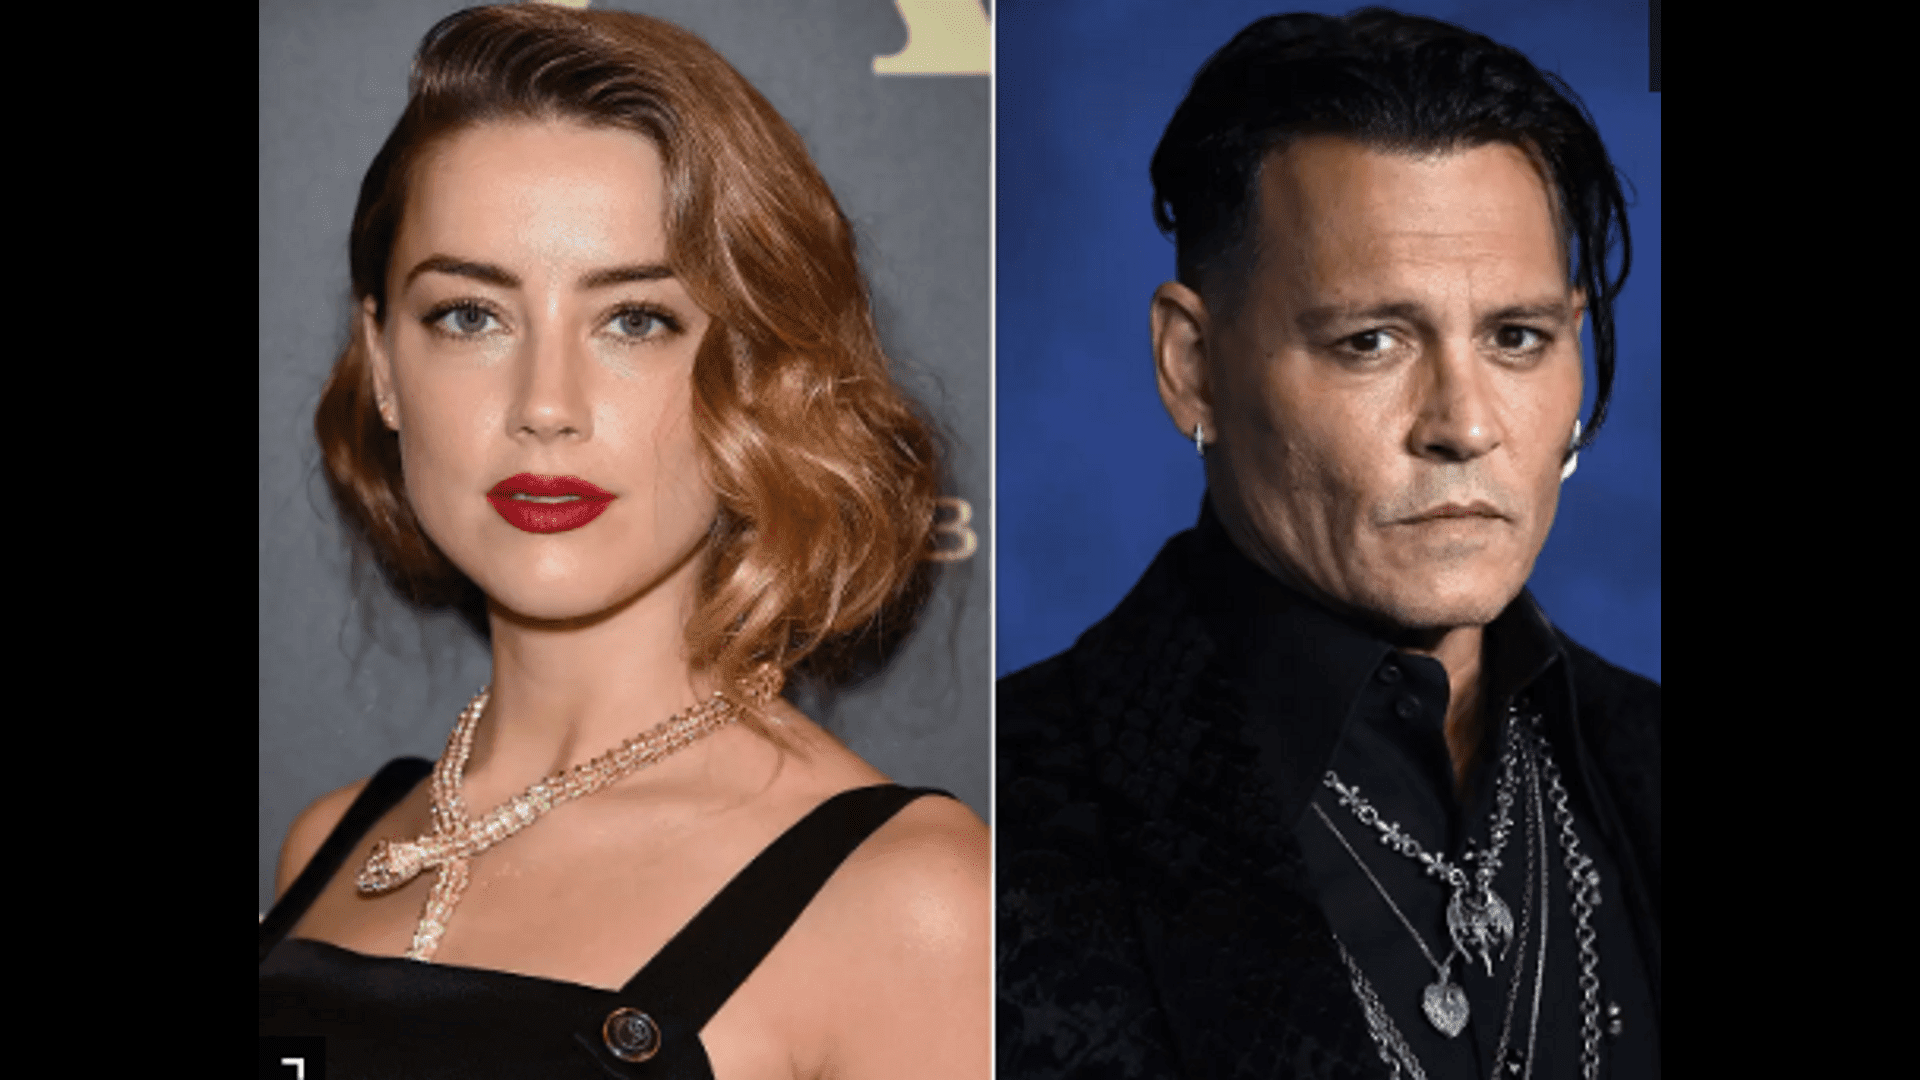 Amber Heard accuses Johnny Depp of sexual assault